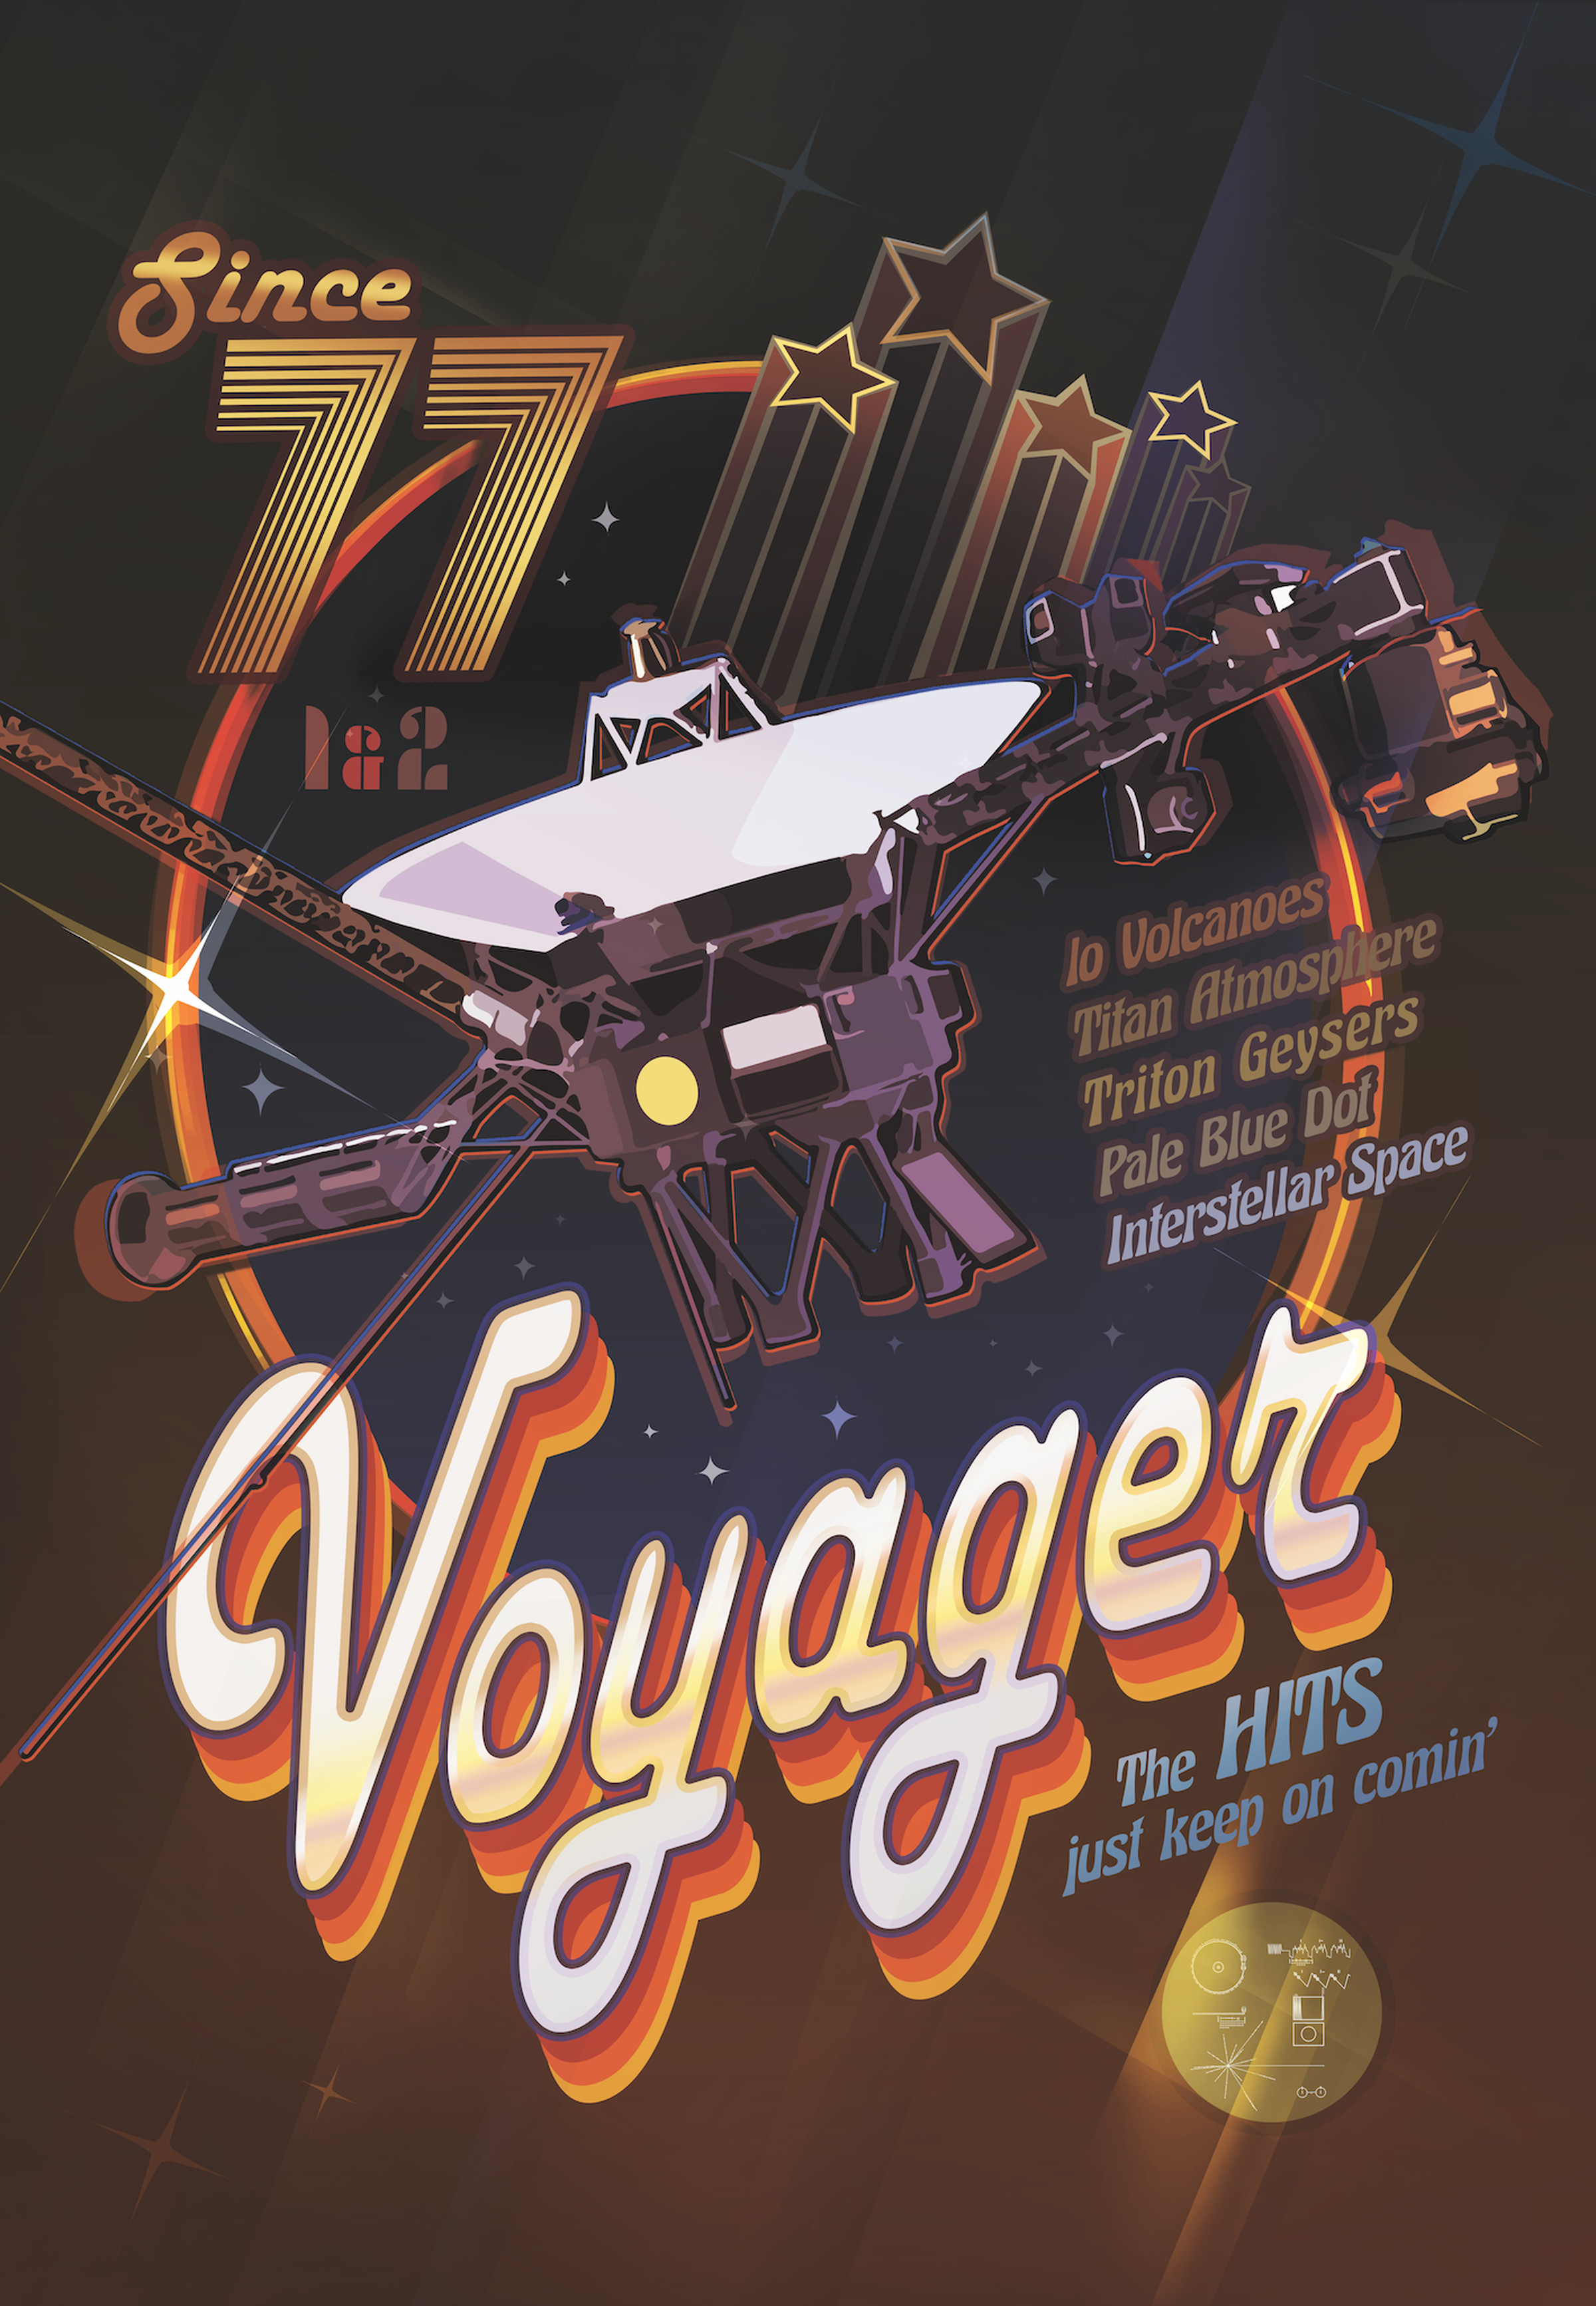 A 1970s disco-style poster showing one of the Voyager spacecraft.